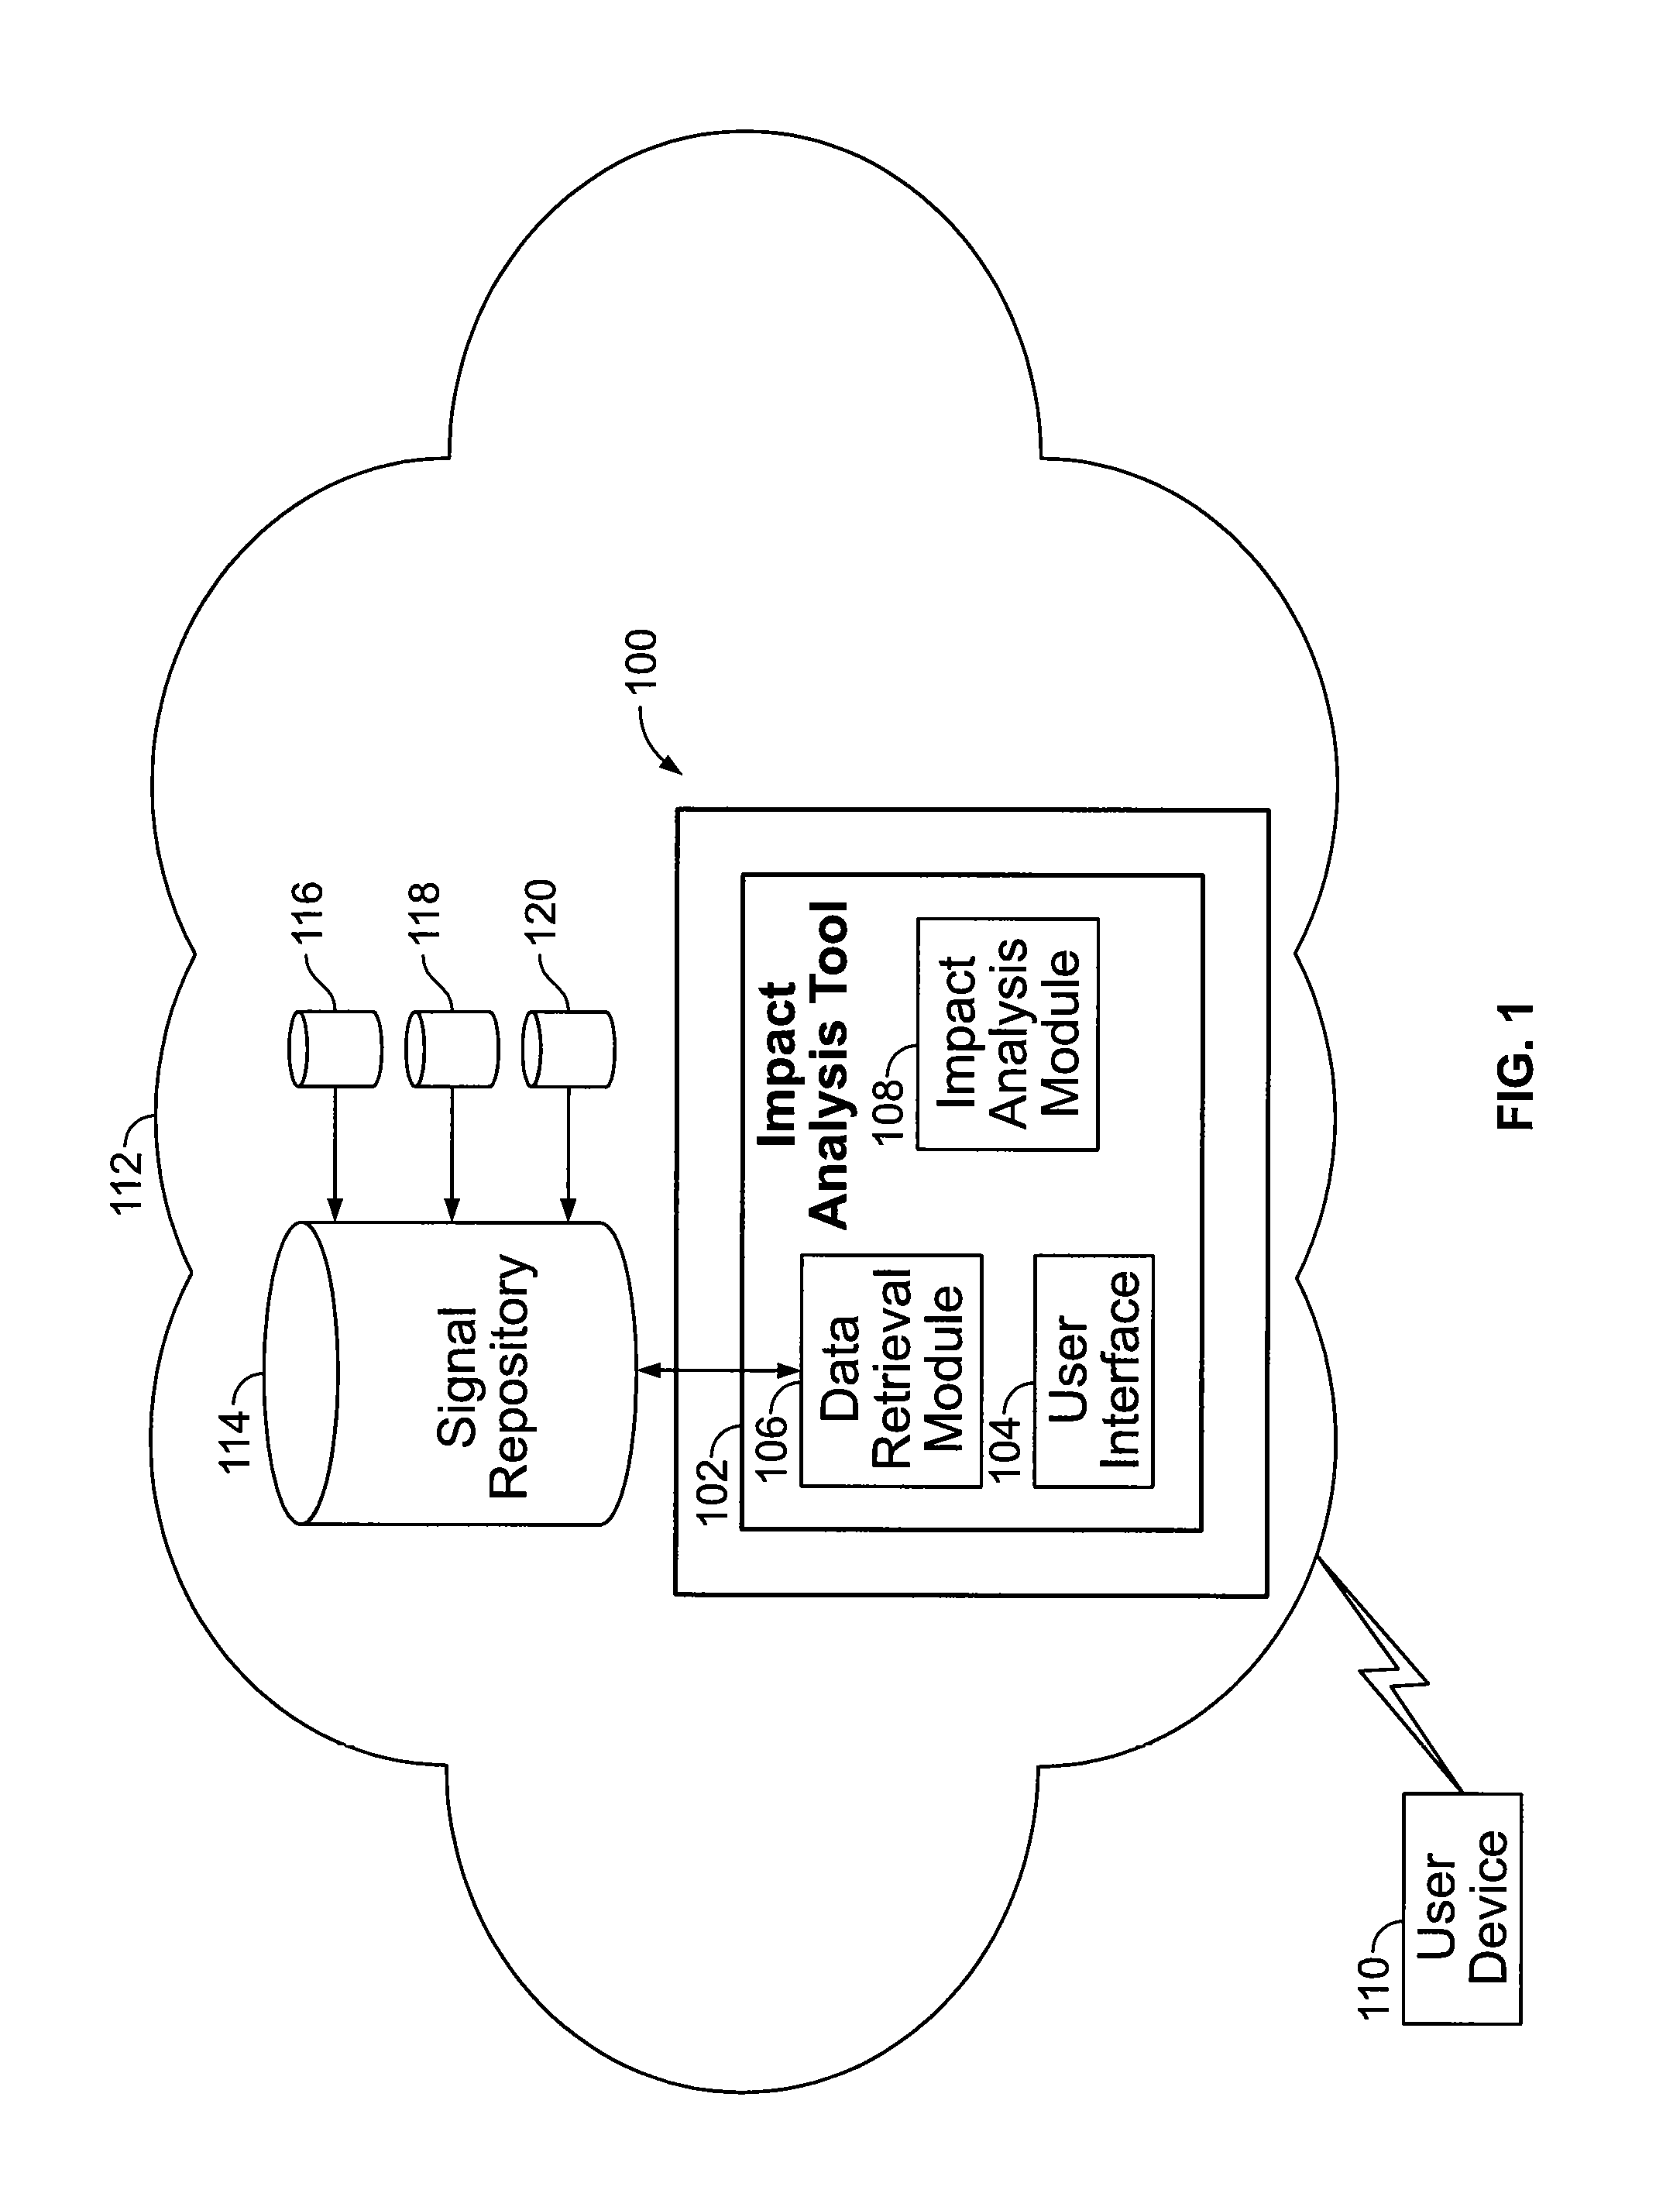 Method and Apparatus for Automated Impact Analysis